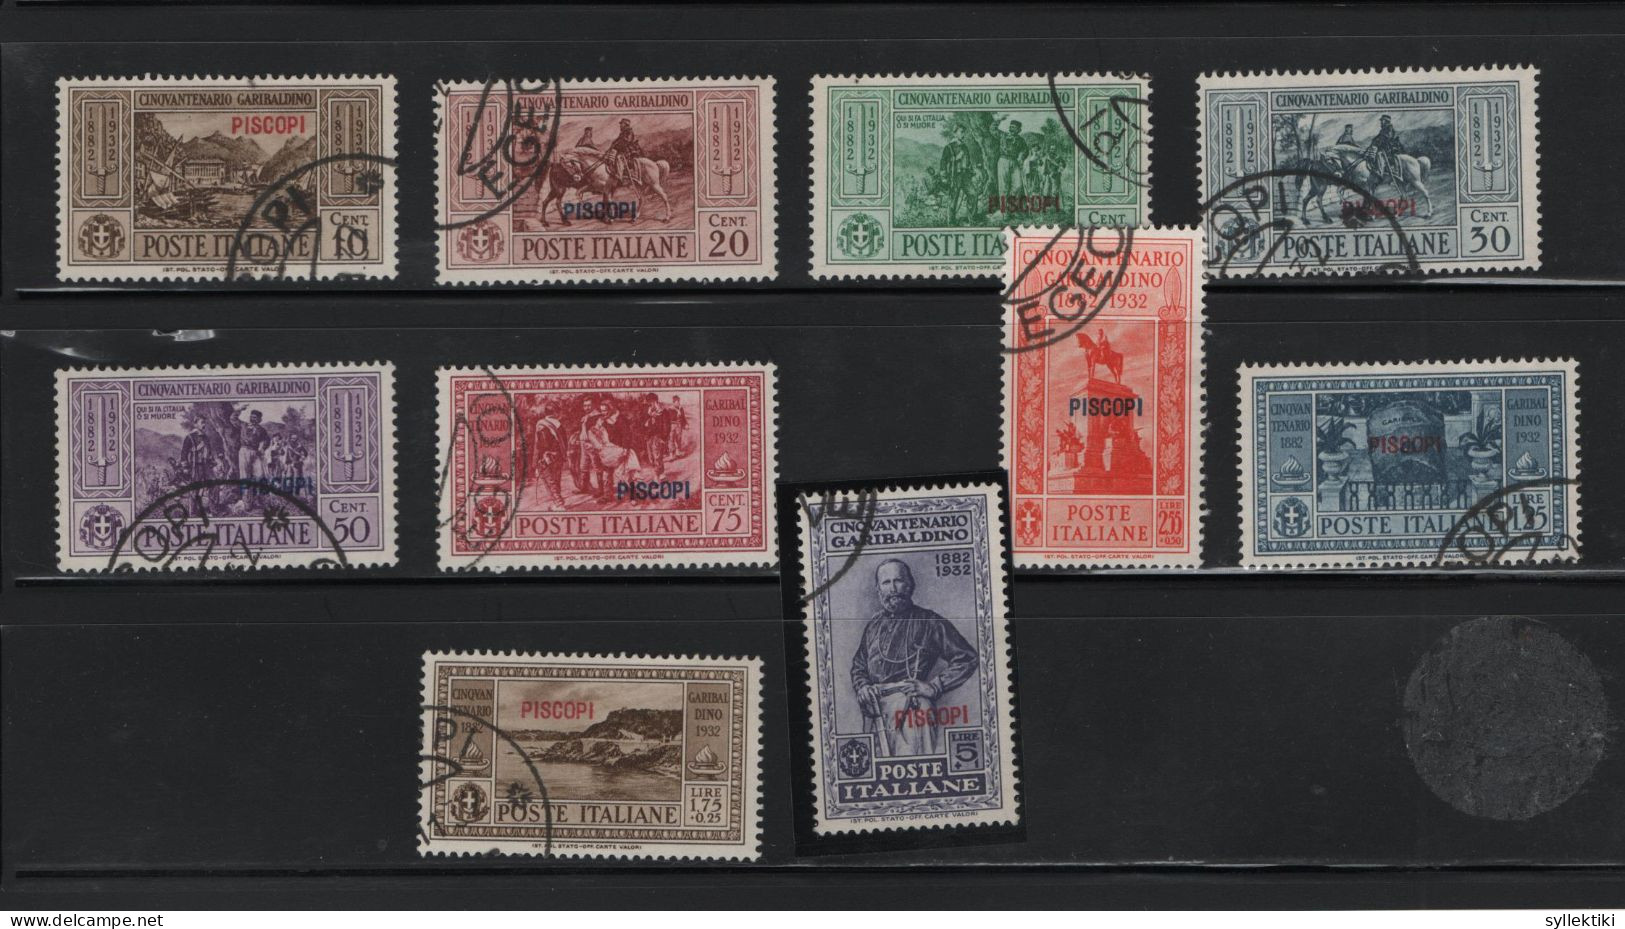 GREECE 1932 DODECANESE GARIBALDI ISSUE PISCOPI OVERPRINT COMPLETE SET USED STAMPS   HELLAS No 108II - 117II AND VALUE E - Dodecaneso